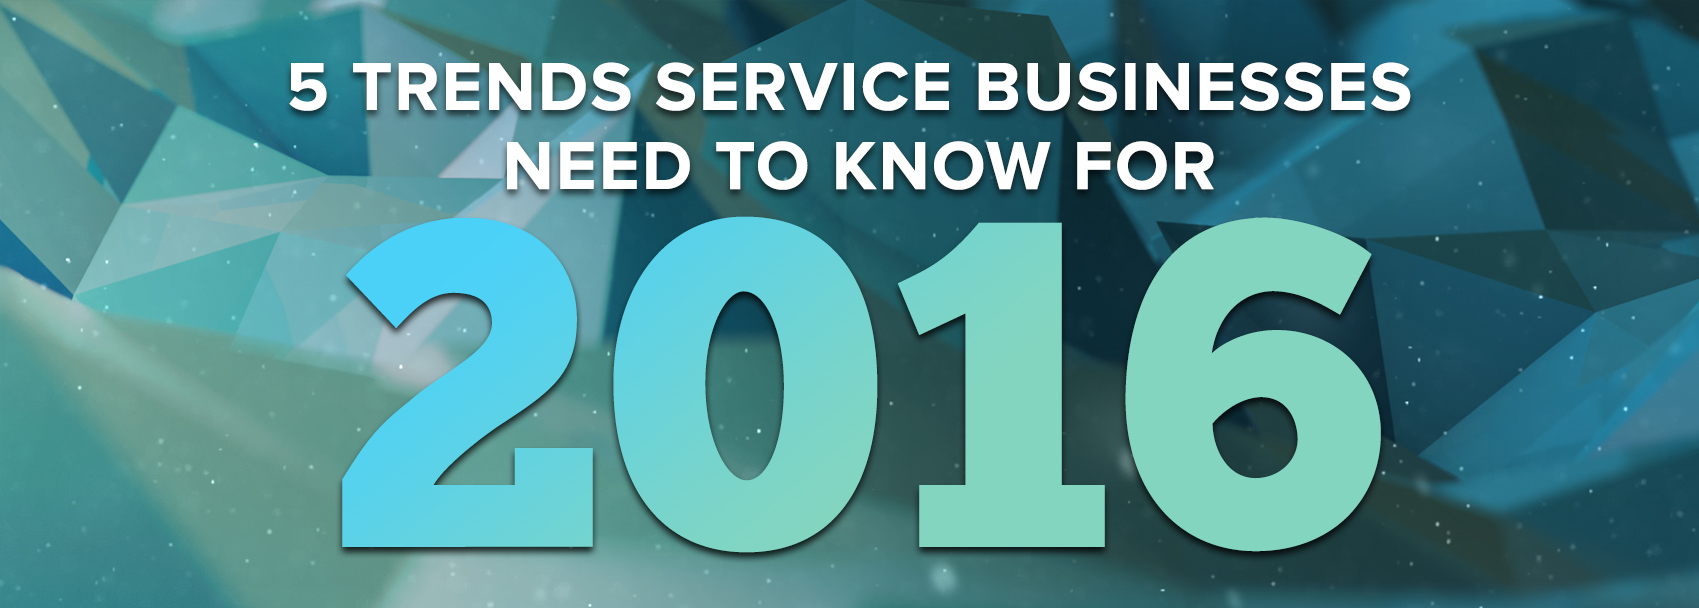 5 trends service businesses need to know for 2016